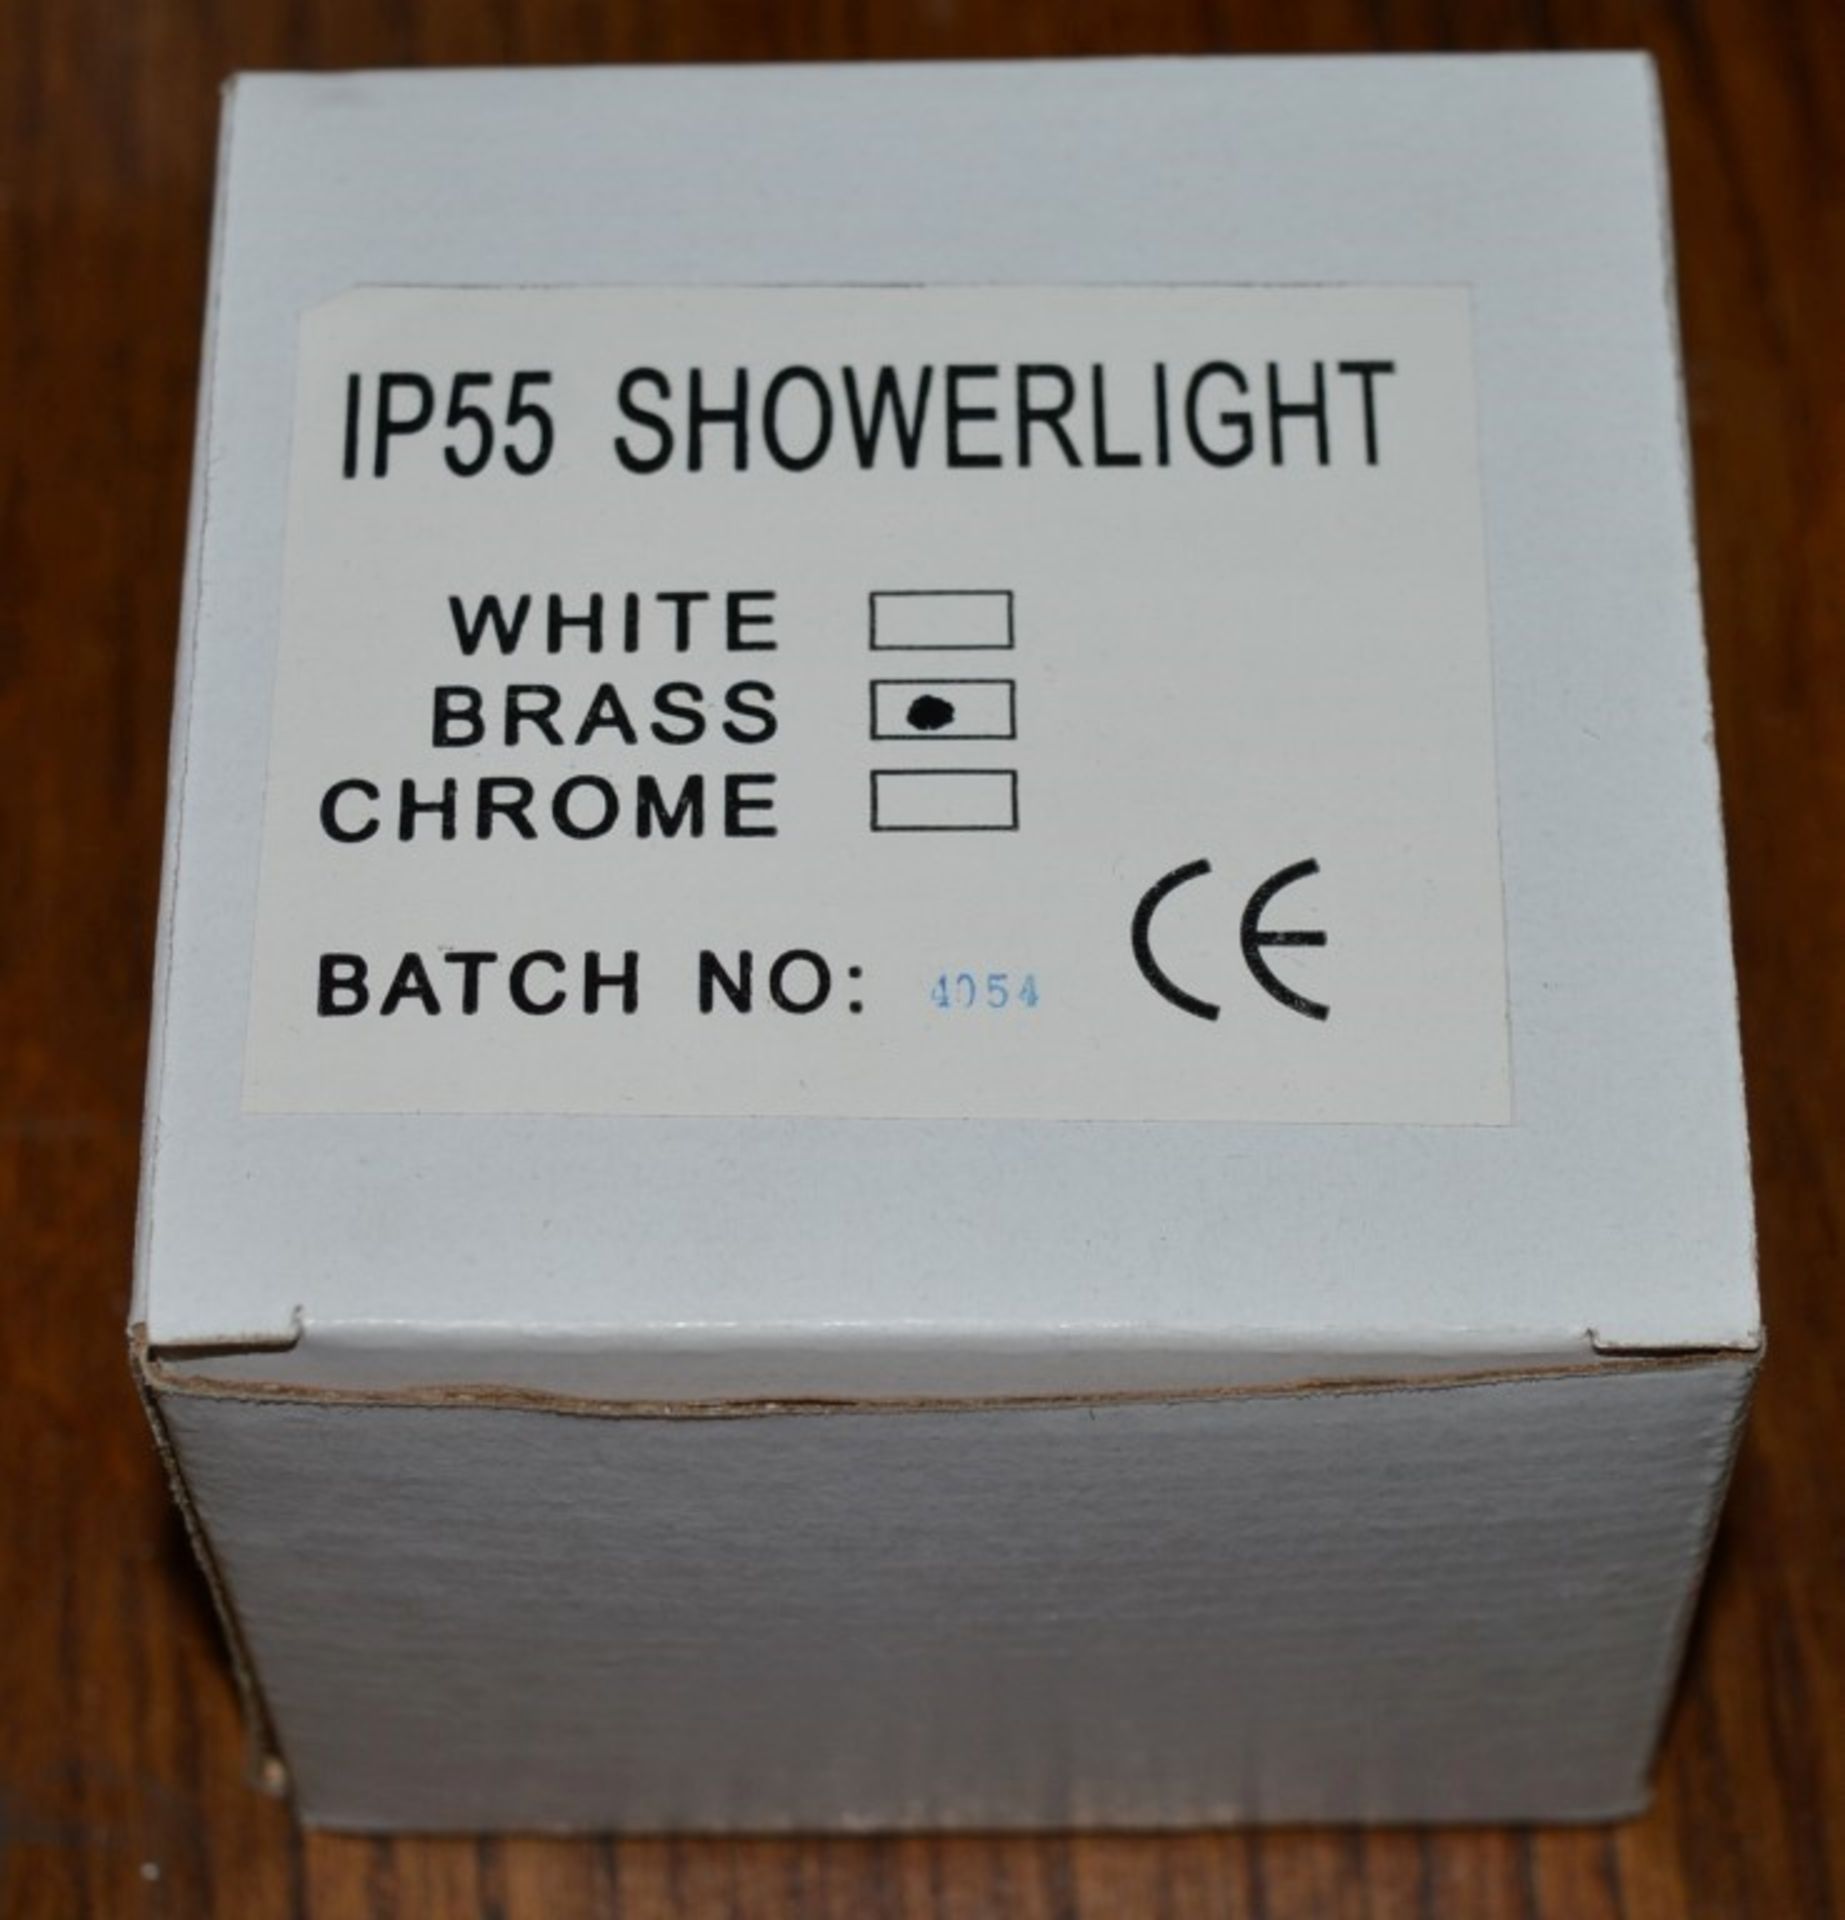 49 x Low Voltage IP55 Shower Lights in Brass - Brass Downlights With Glass Cover and Fixings - New - Image 4 of 4